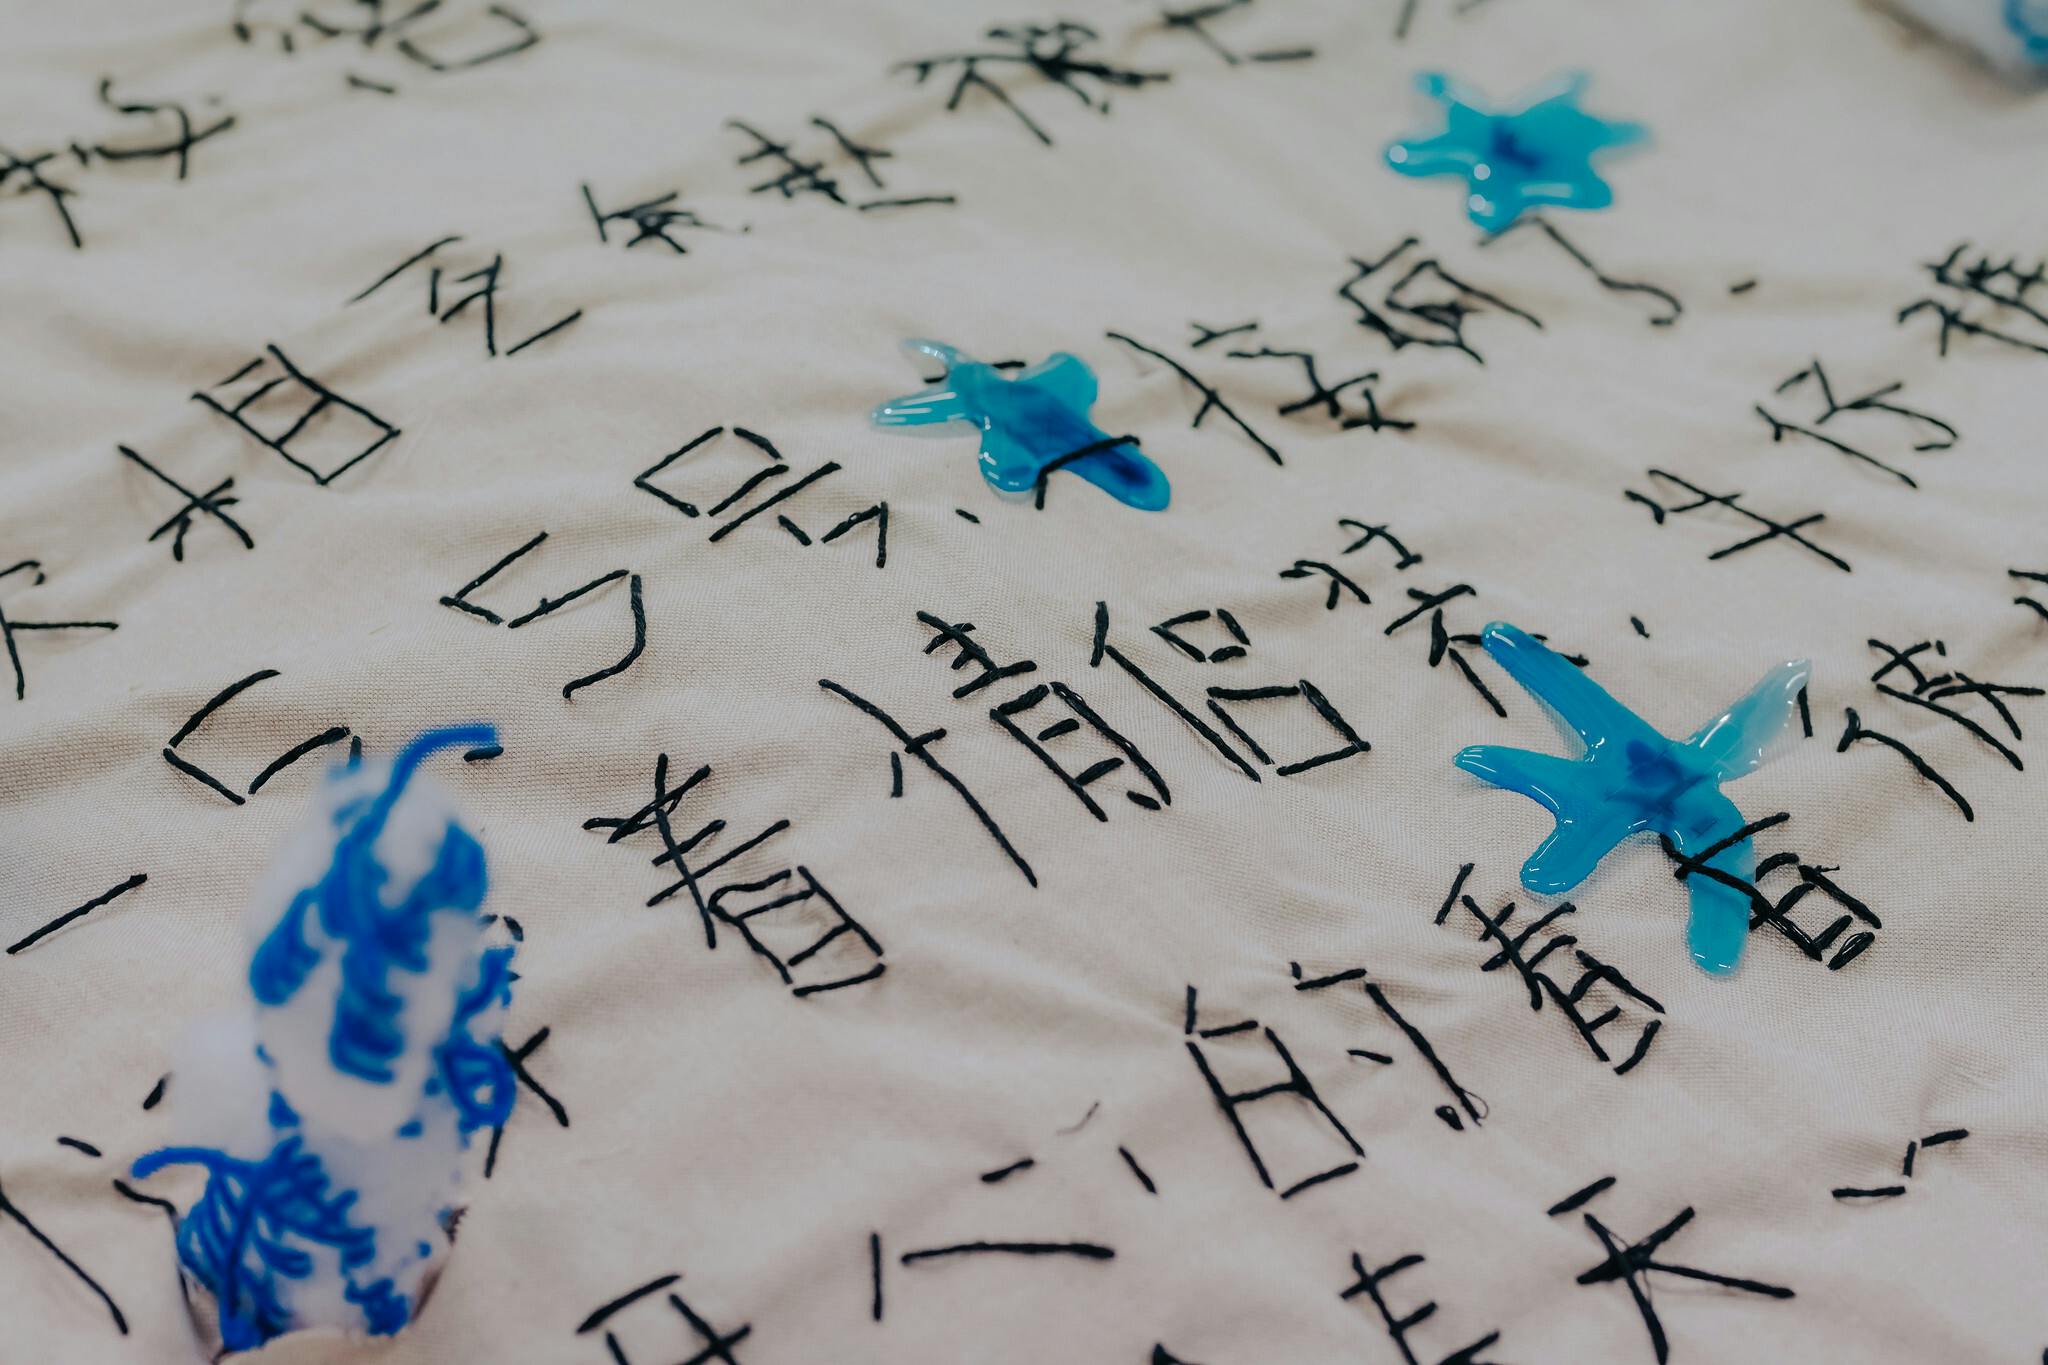 Embroidered lettering on a pale fabric with drops of bright blue wax throughout the image